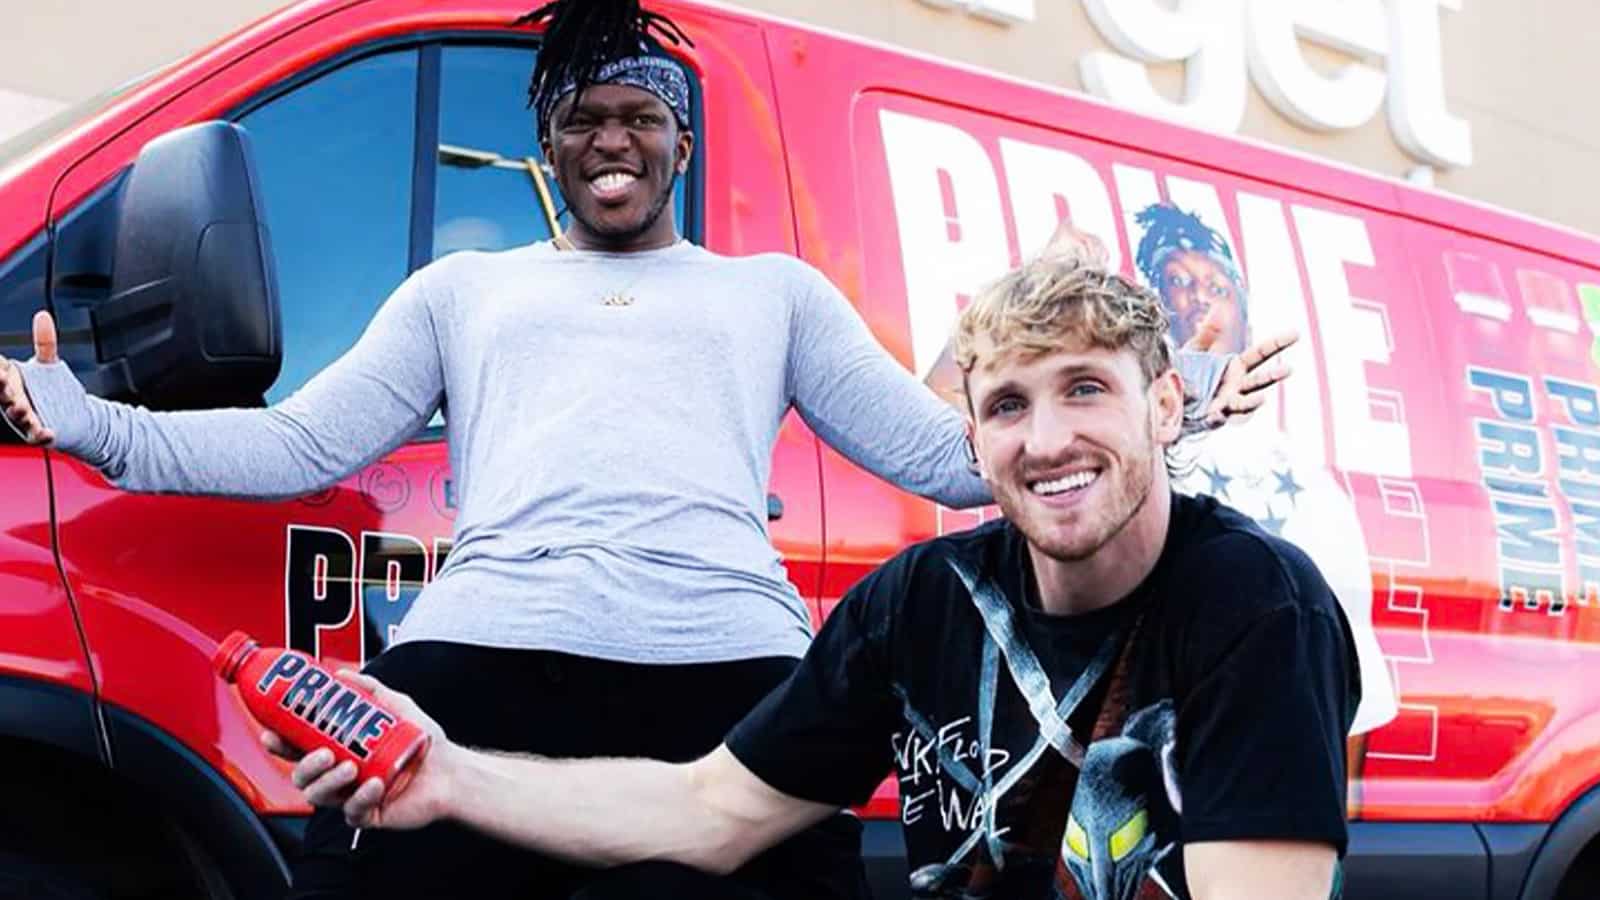 KSI and Logan Paul holding PRIME Hydration in front of Target screenshot.